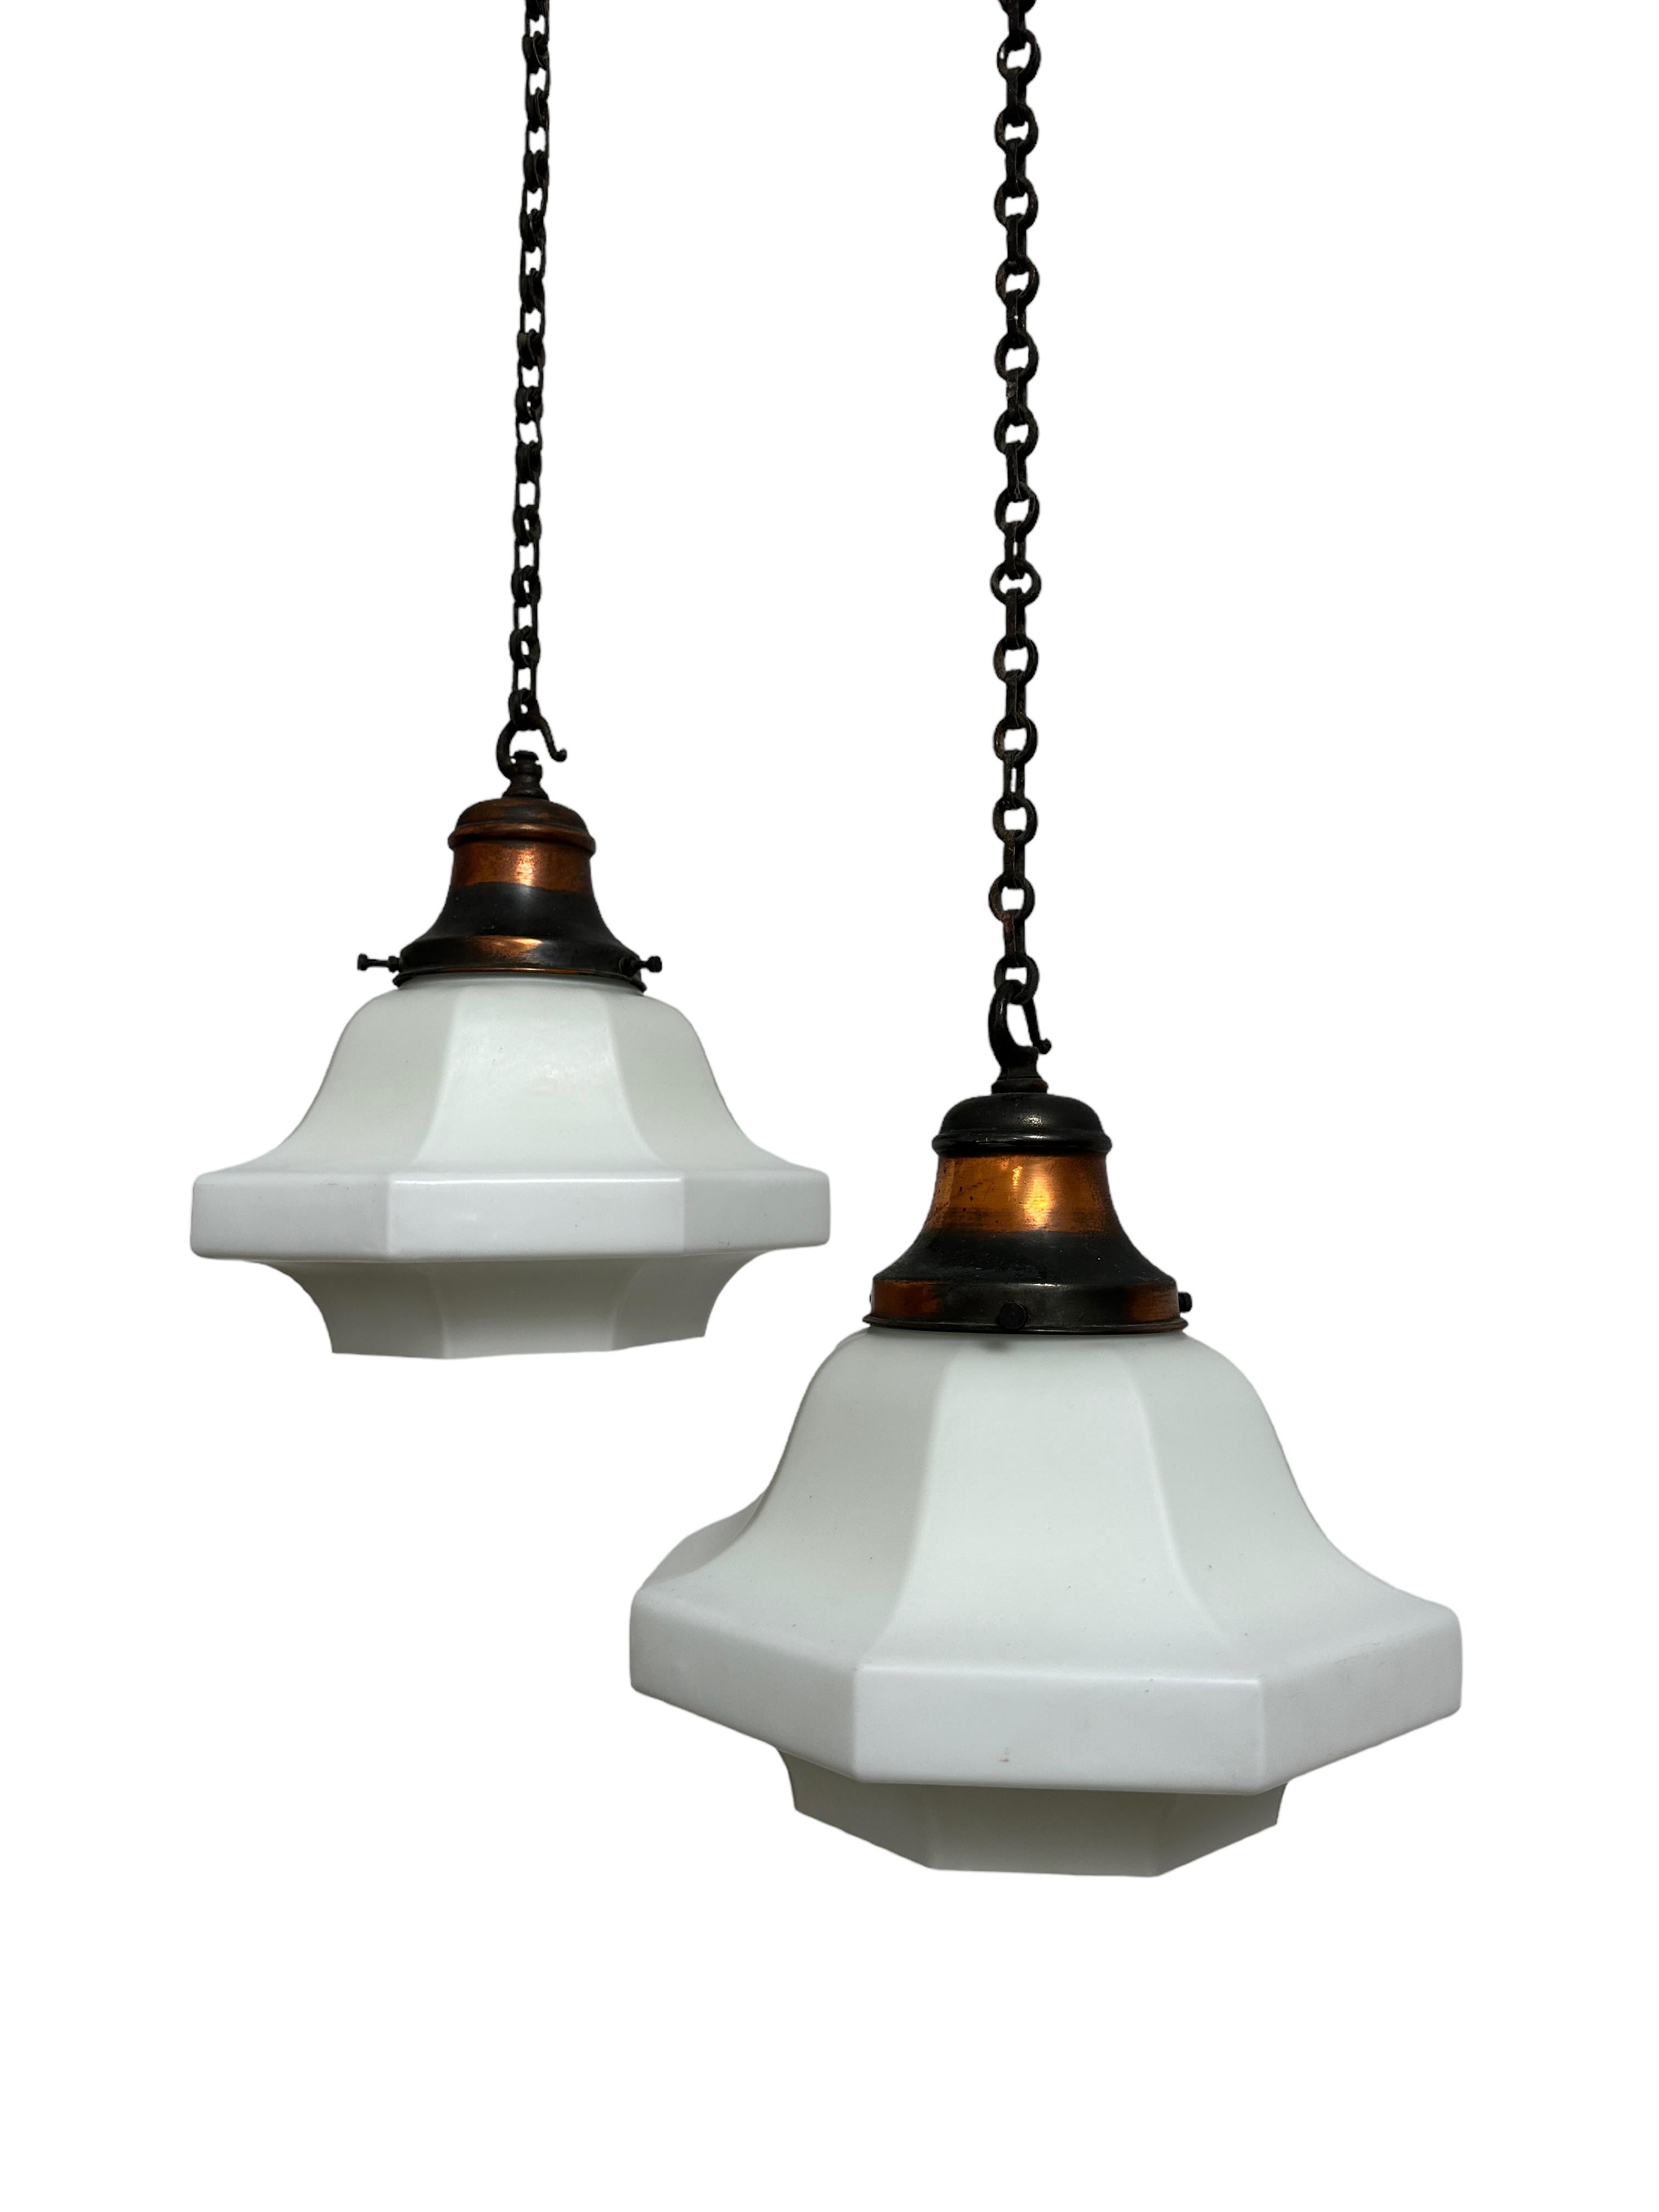 - A wonderful pair of Edwardian hexagonal opaline ceiling pendants, England circa 1910.
- Heavy quality satin opaline open glass shades with matching patinated copper galleries and original chain and hooked ceiling roses. 
- Wear commensurate with